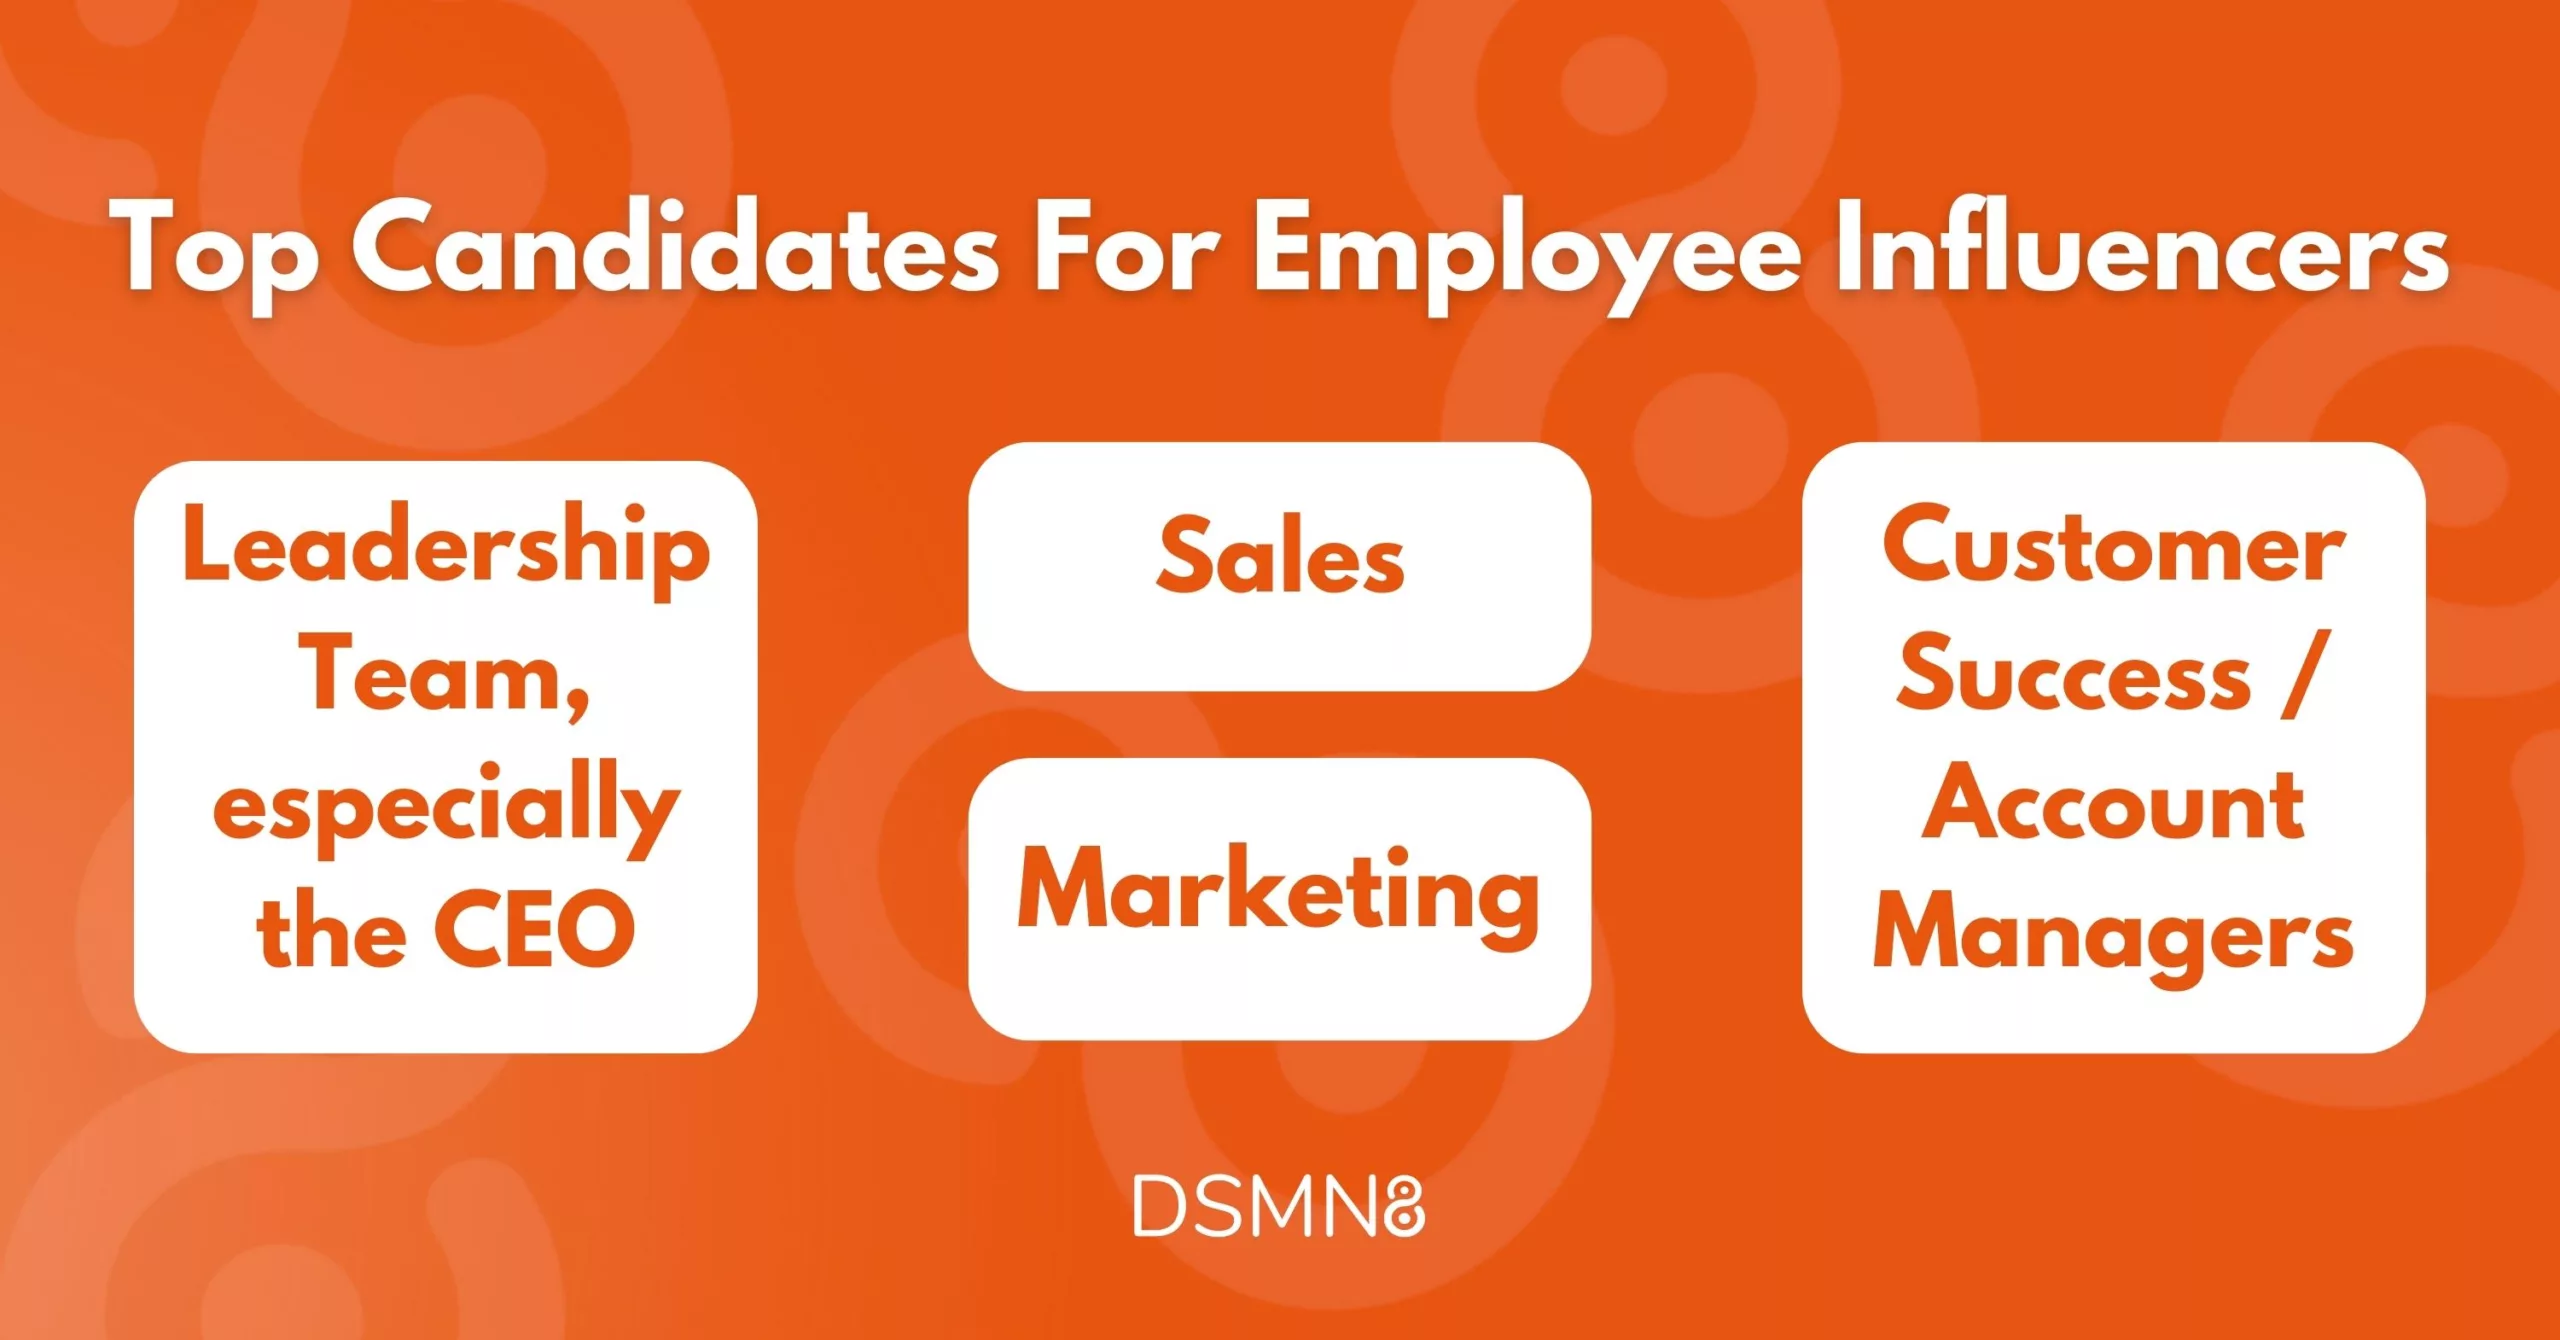 Top candidates for employee influencers